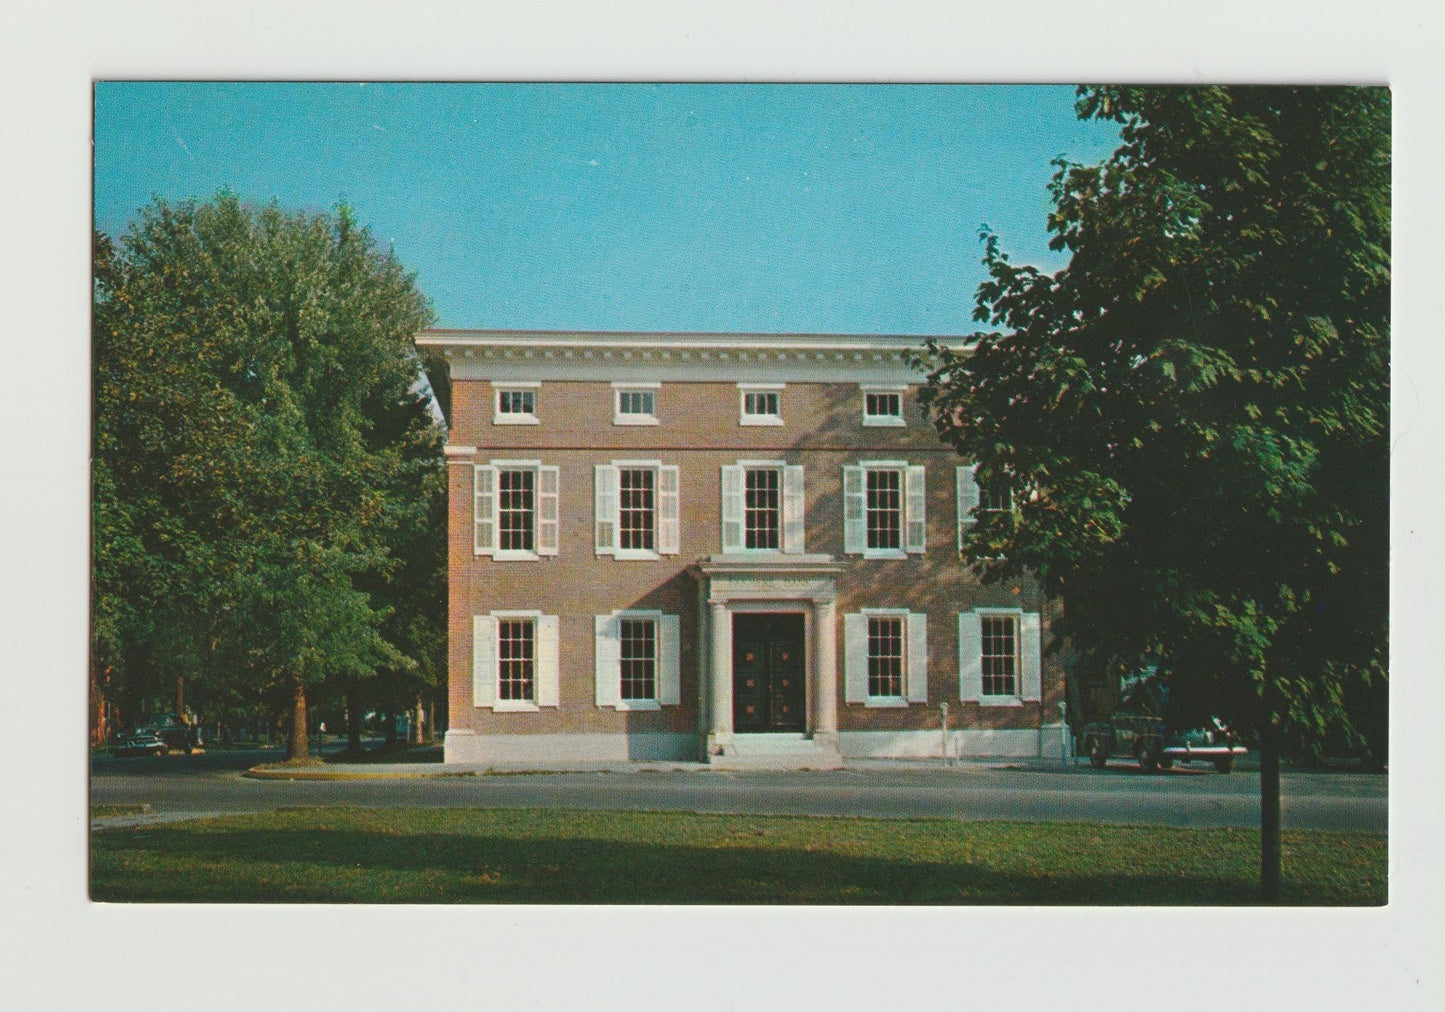 Postcard DE Delaware Georgetown Farmers Bank of the State Chrome Unused